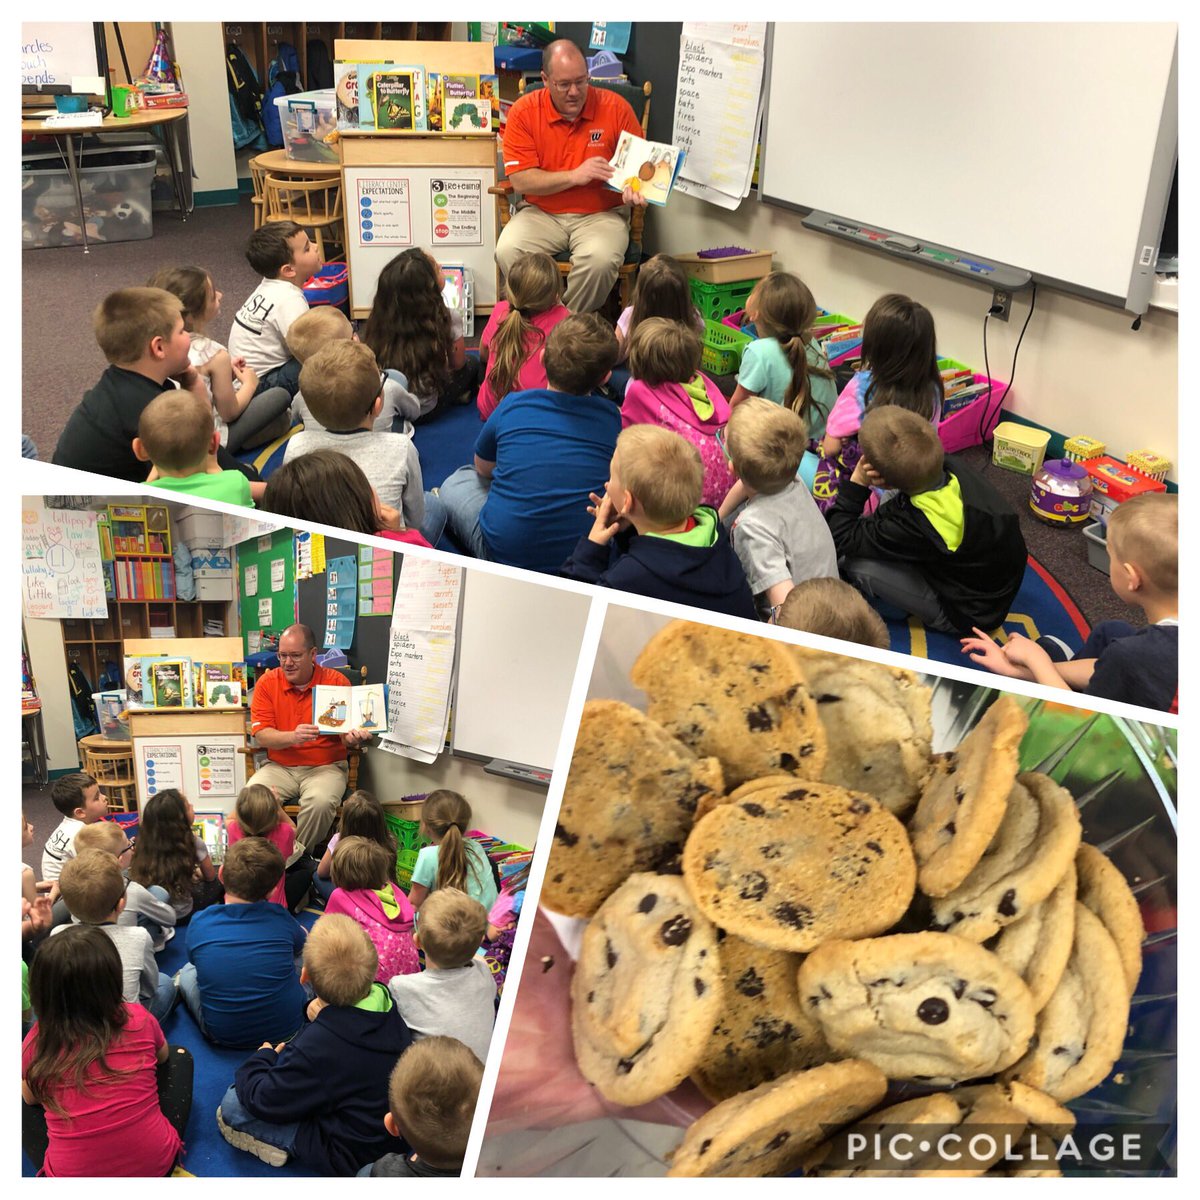 Today’s guest reader was Mr. Mattern! He even followed up his book by sharing cookies with the class...of course you know what they wanted next....  #ifyougiveamouseacookie #itwillwantaglassofmilk #AwesomeApaches @WMS_Apaches